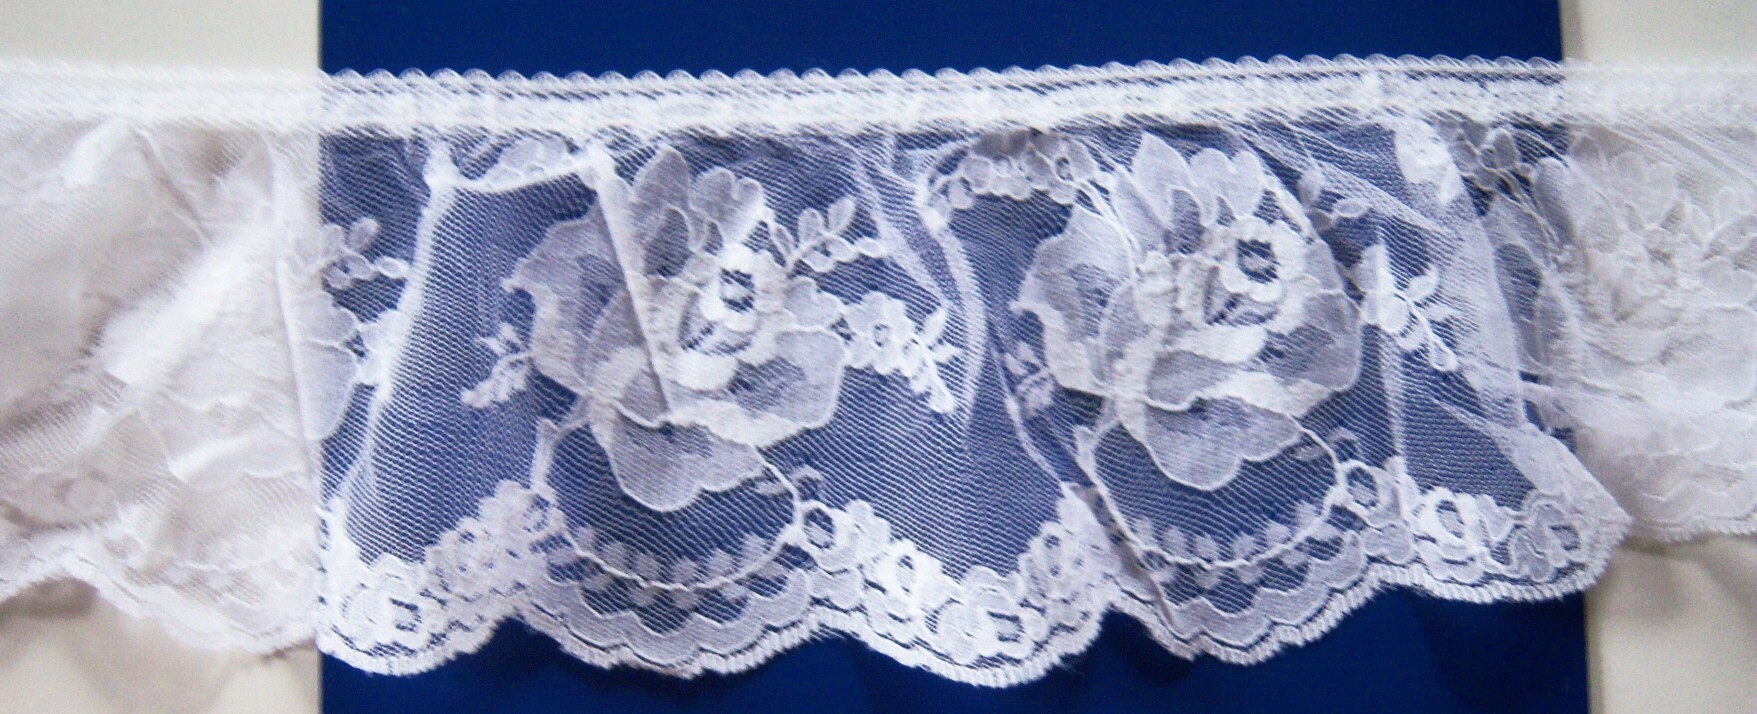 Antique White 4" Ruffled Lace